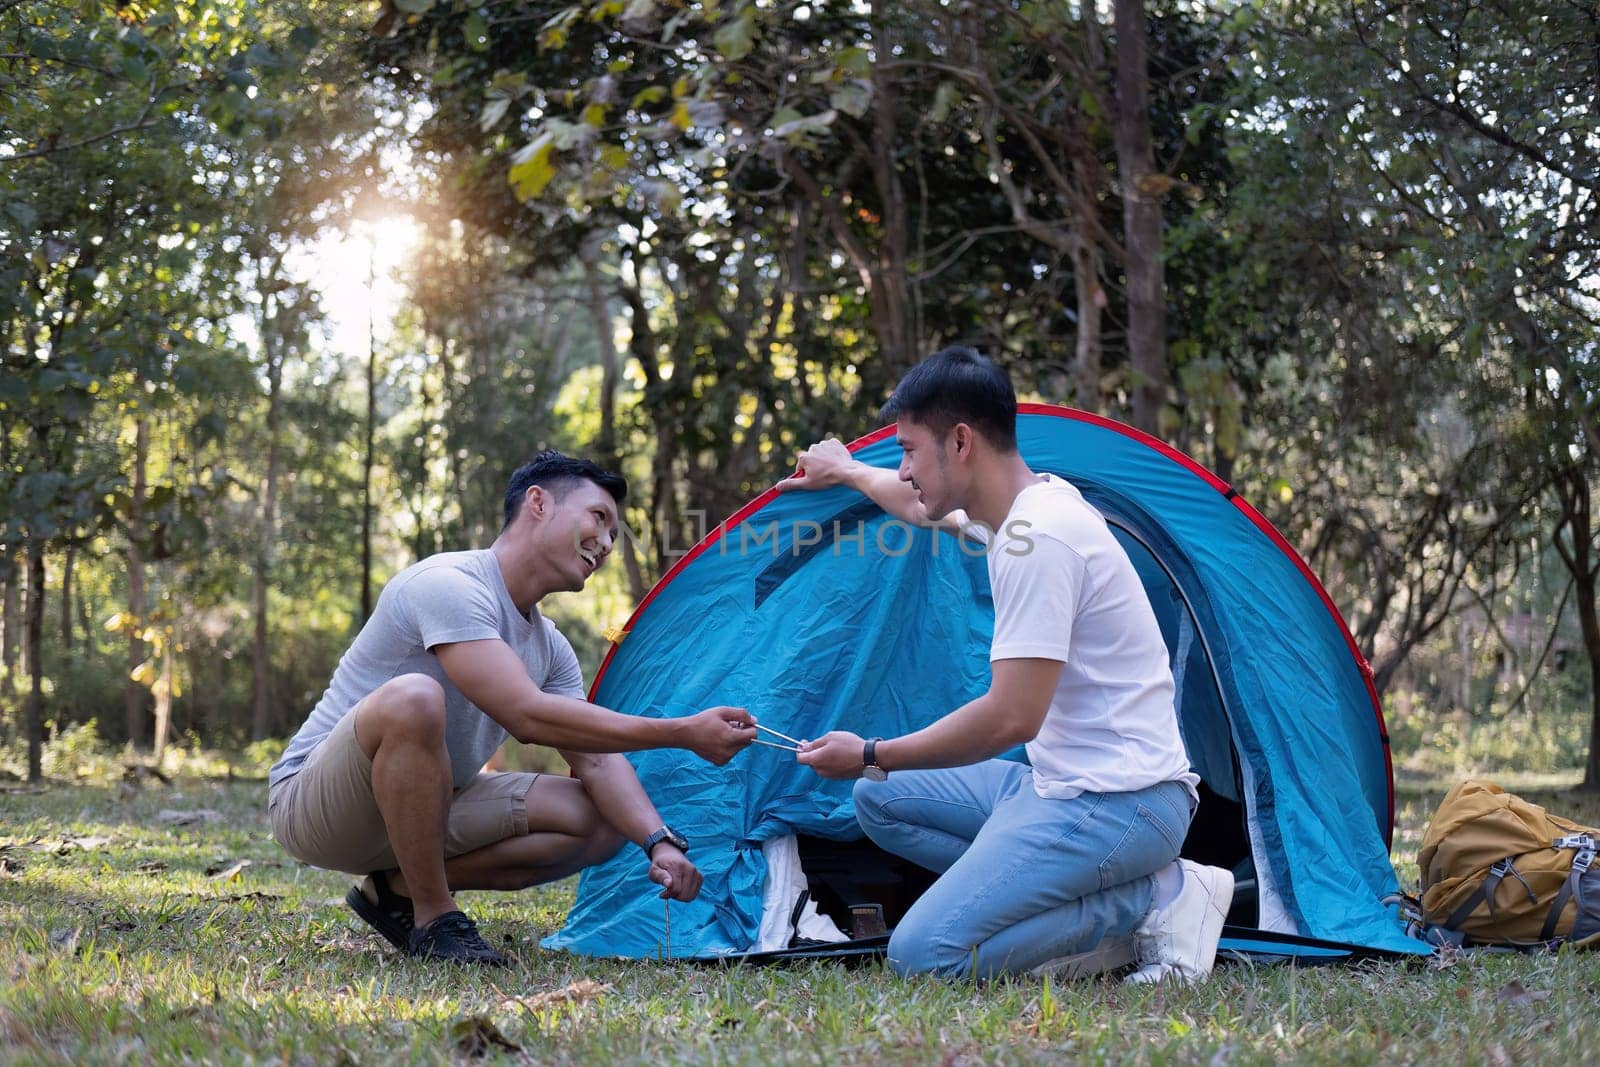 Asian LGBTQ couple camping together Set up a tent on the grass During the weekend vacation.